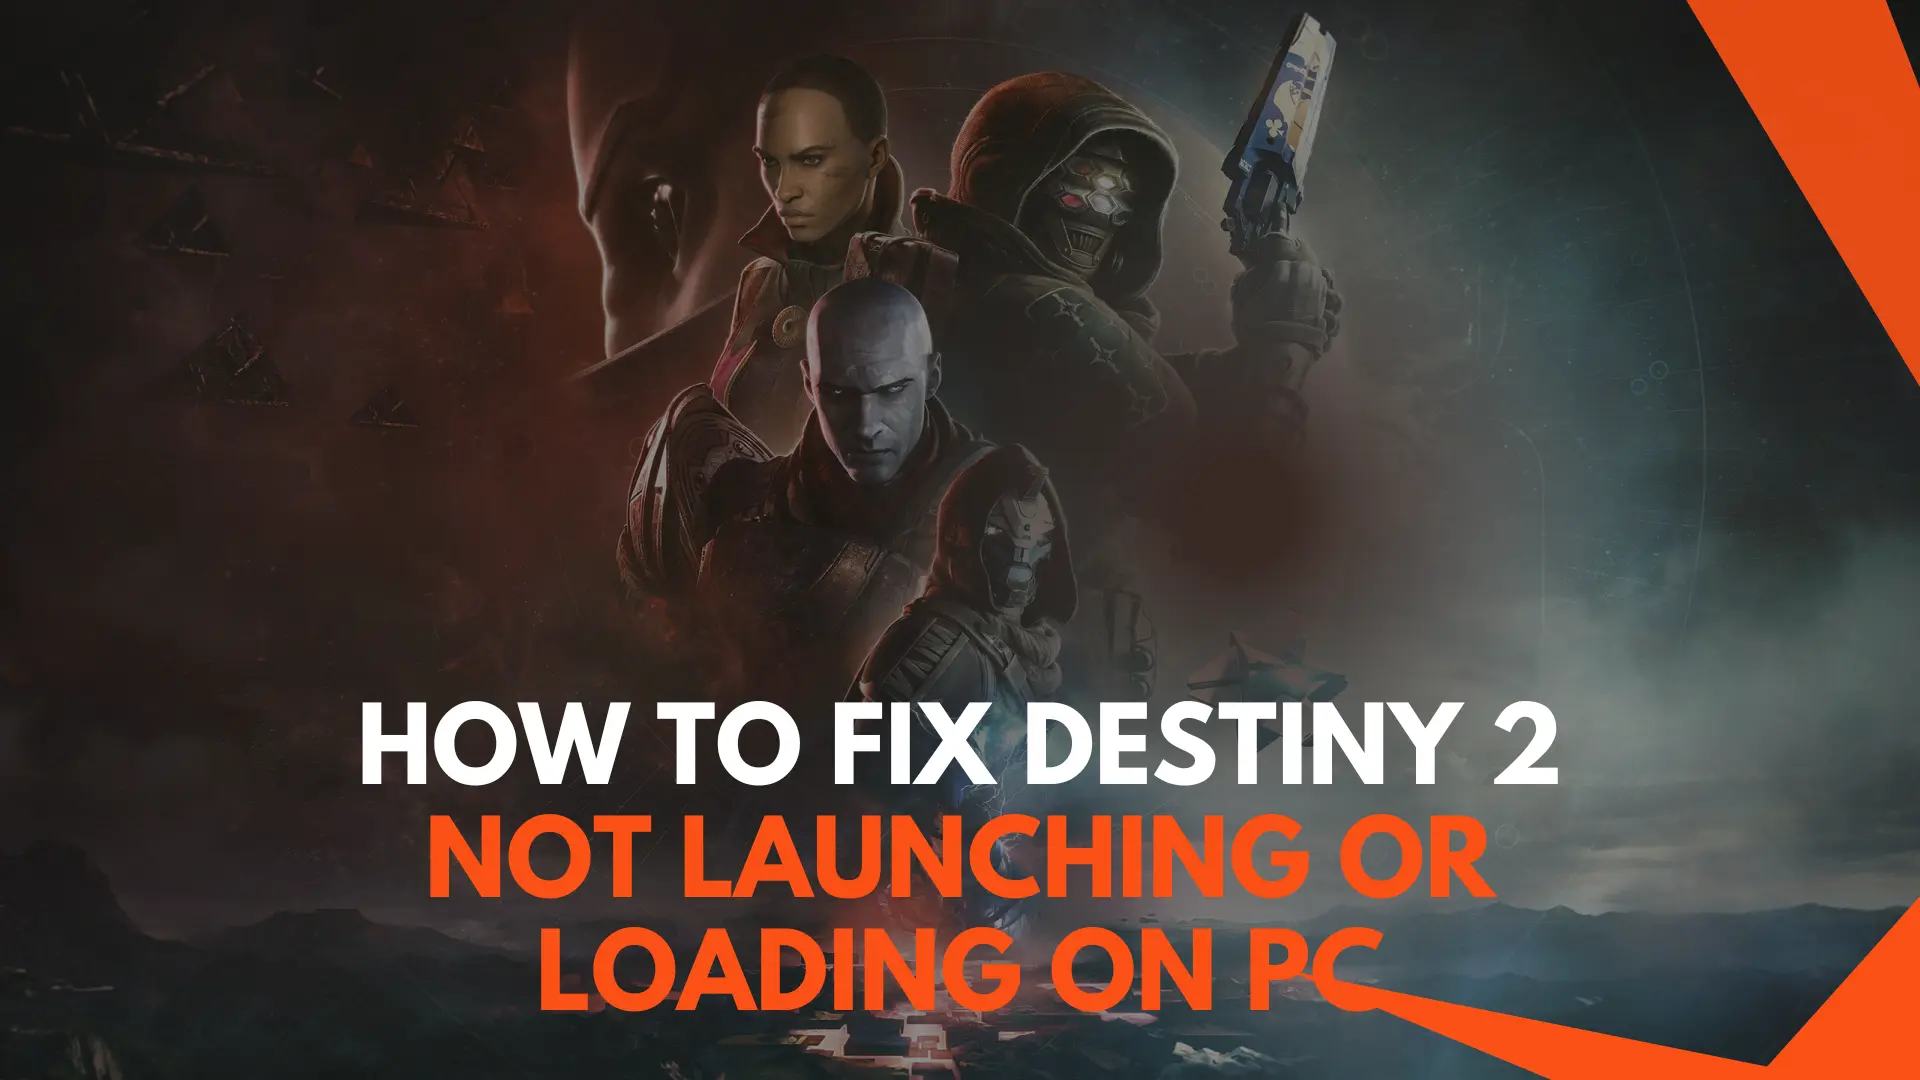 How to Fix Destiny 2 Not Launching or Loading on PC